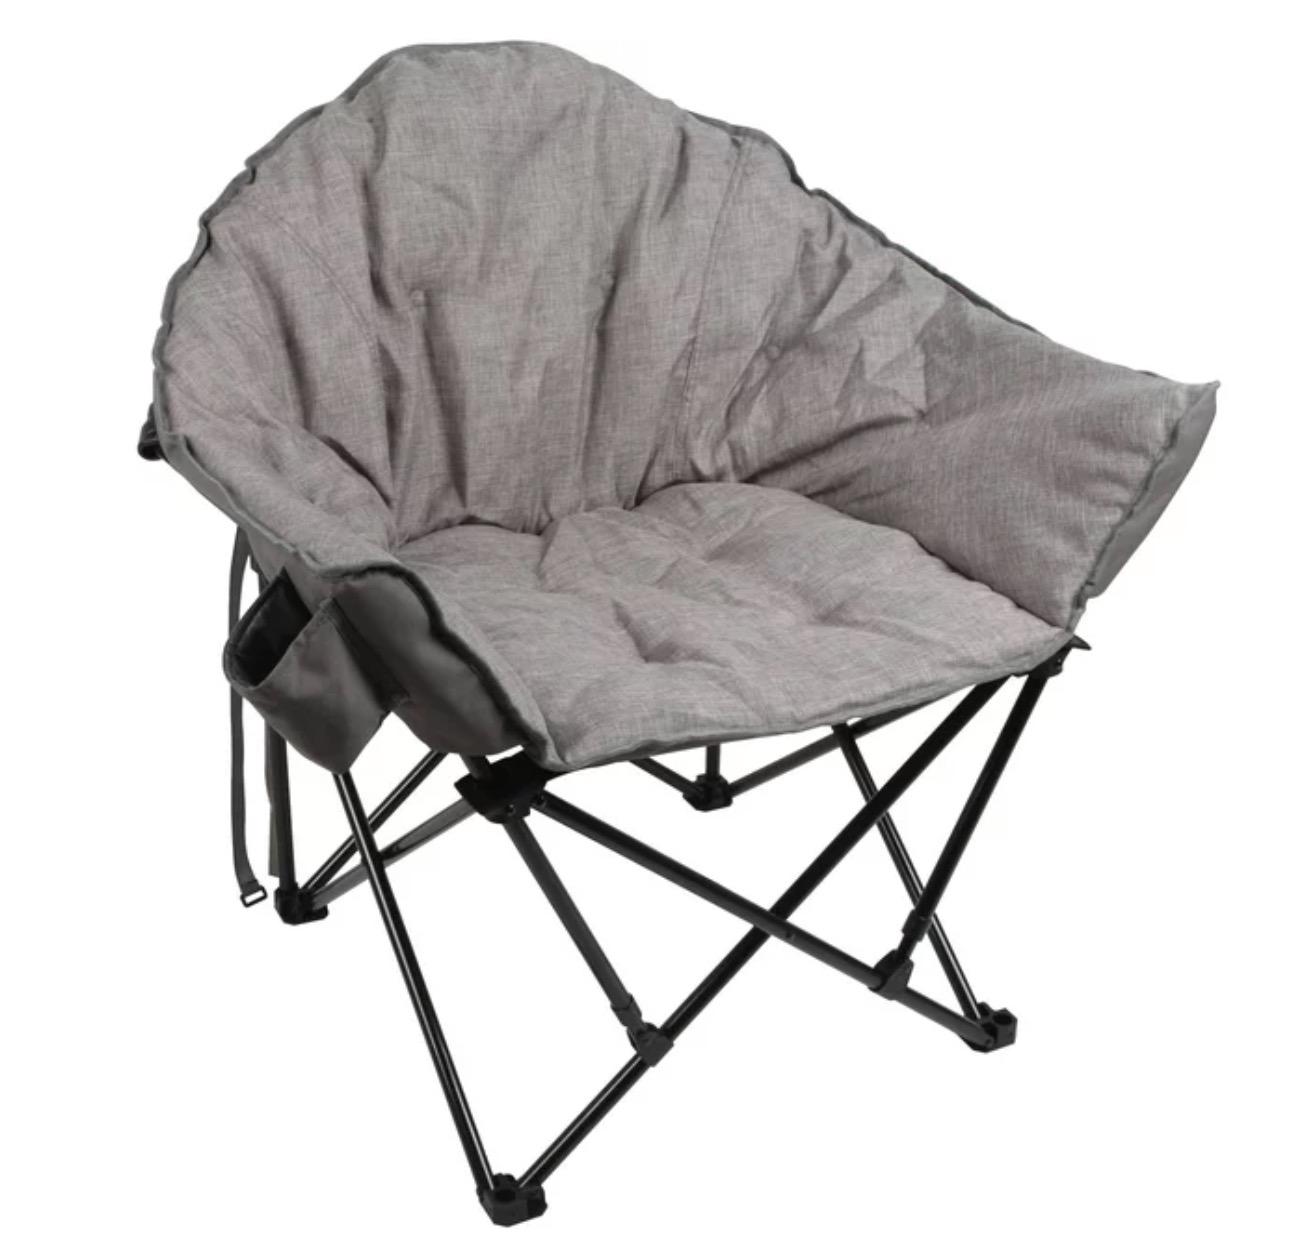 Ozark Trail Camping Club Chair for $35 Shipped